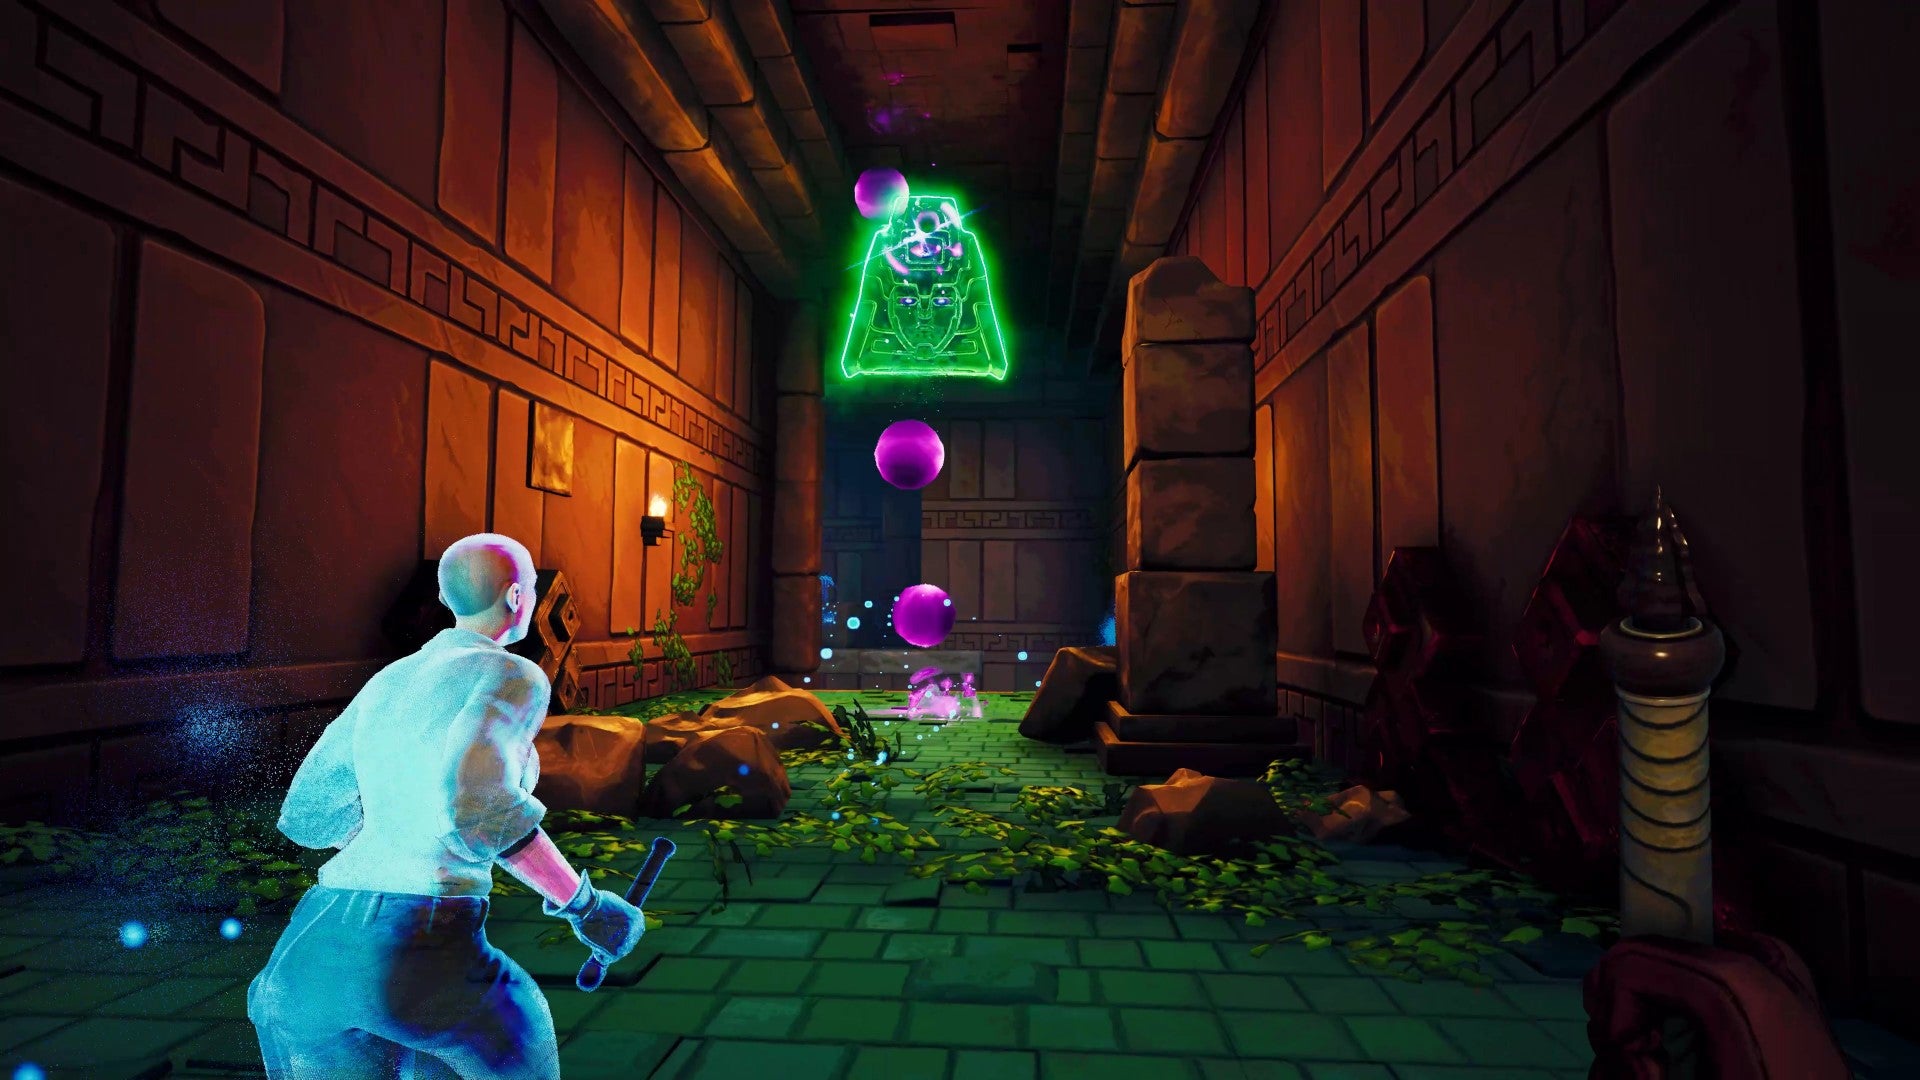 An image from Phantom Abyss which shows the player running down a temple corridor. A ghost is off to their left, and a green apparition looms in front of them both, hurling purple orbs their way.